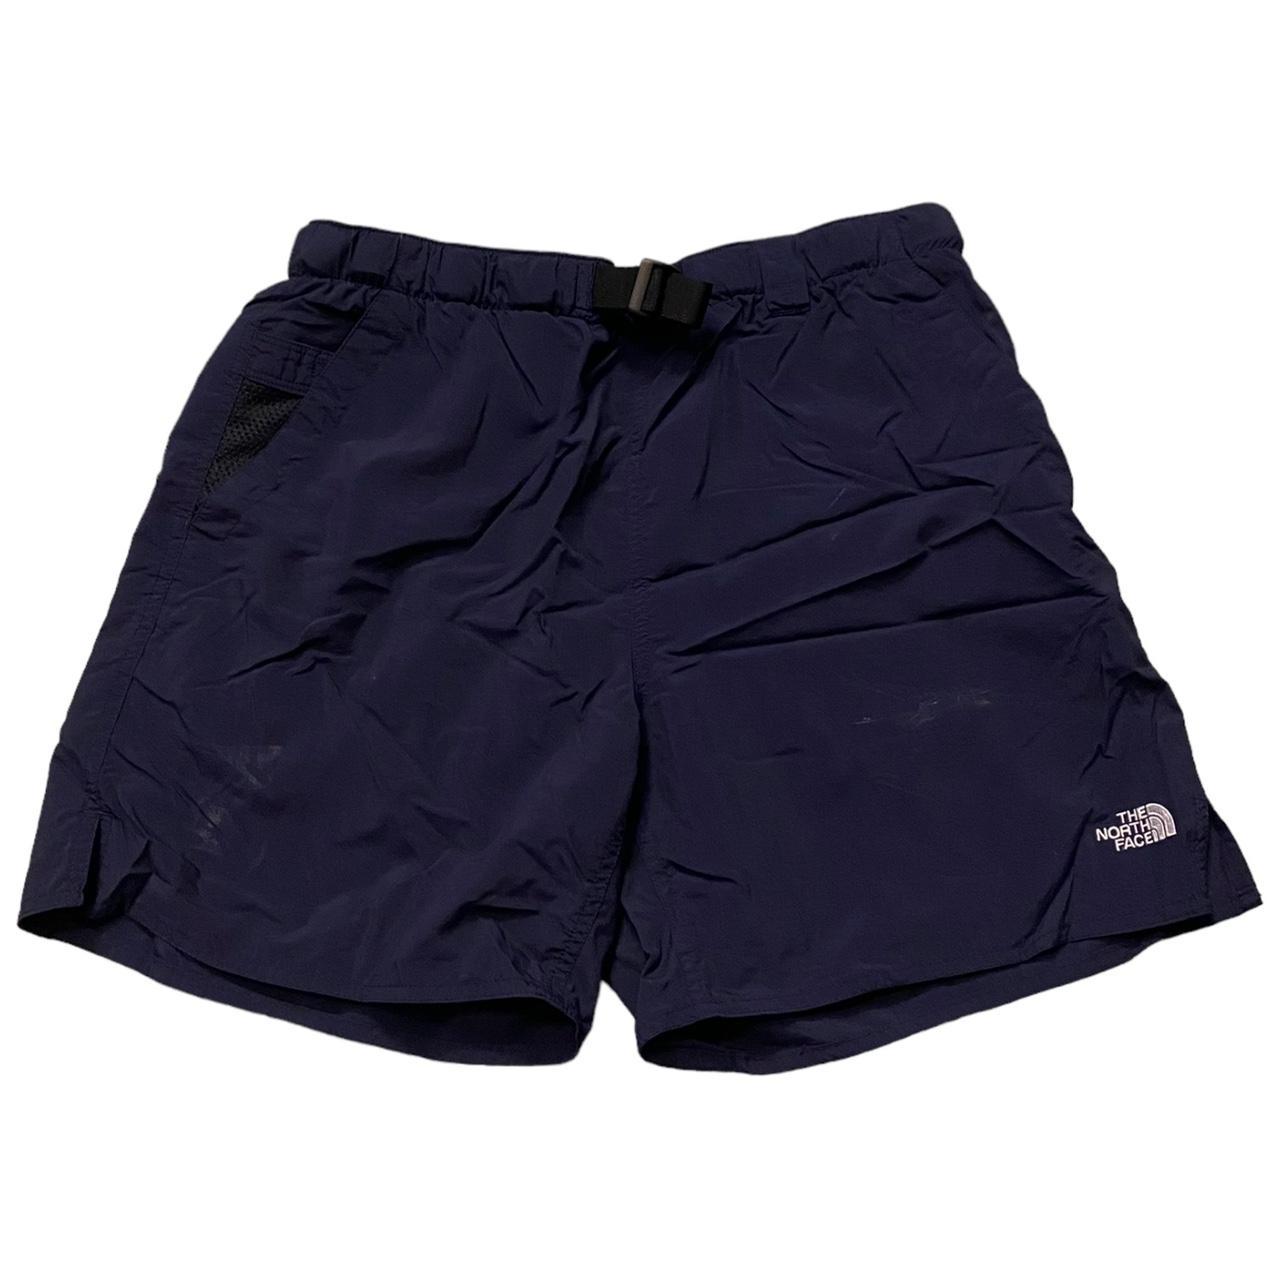 The North Face Men's Navy and White Shorts